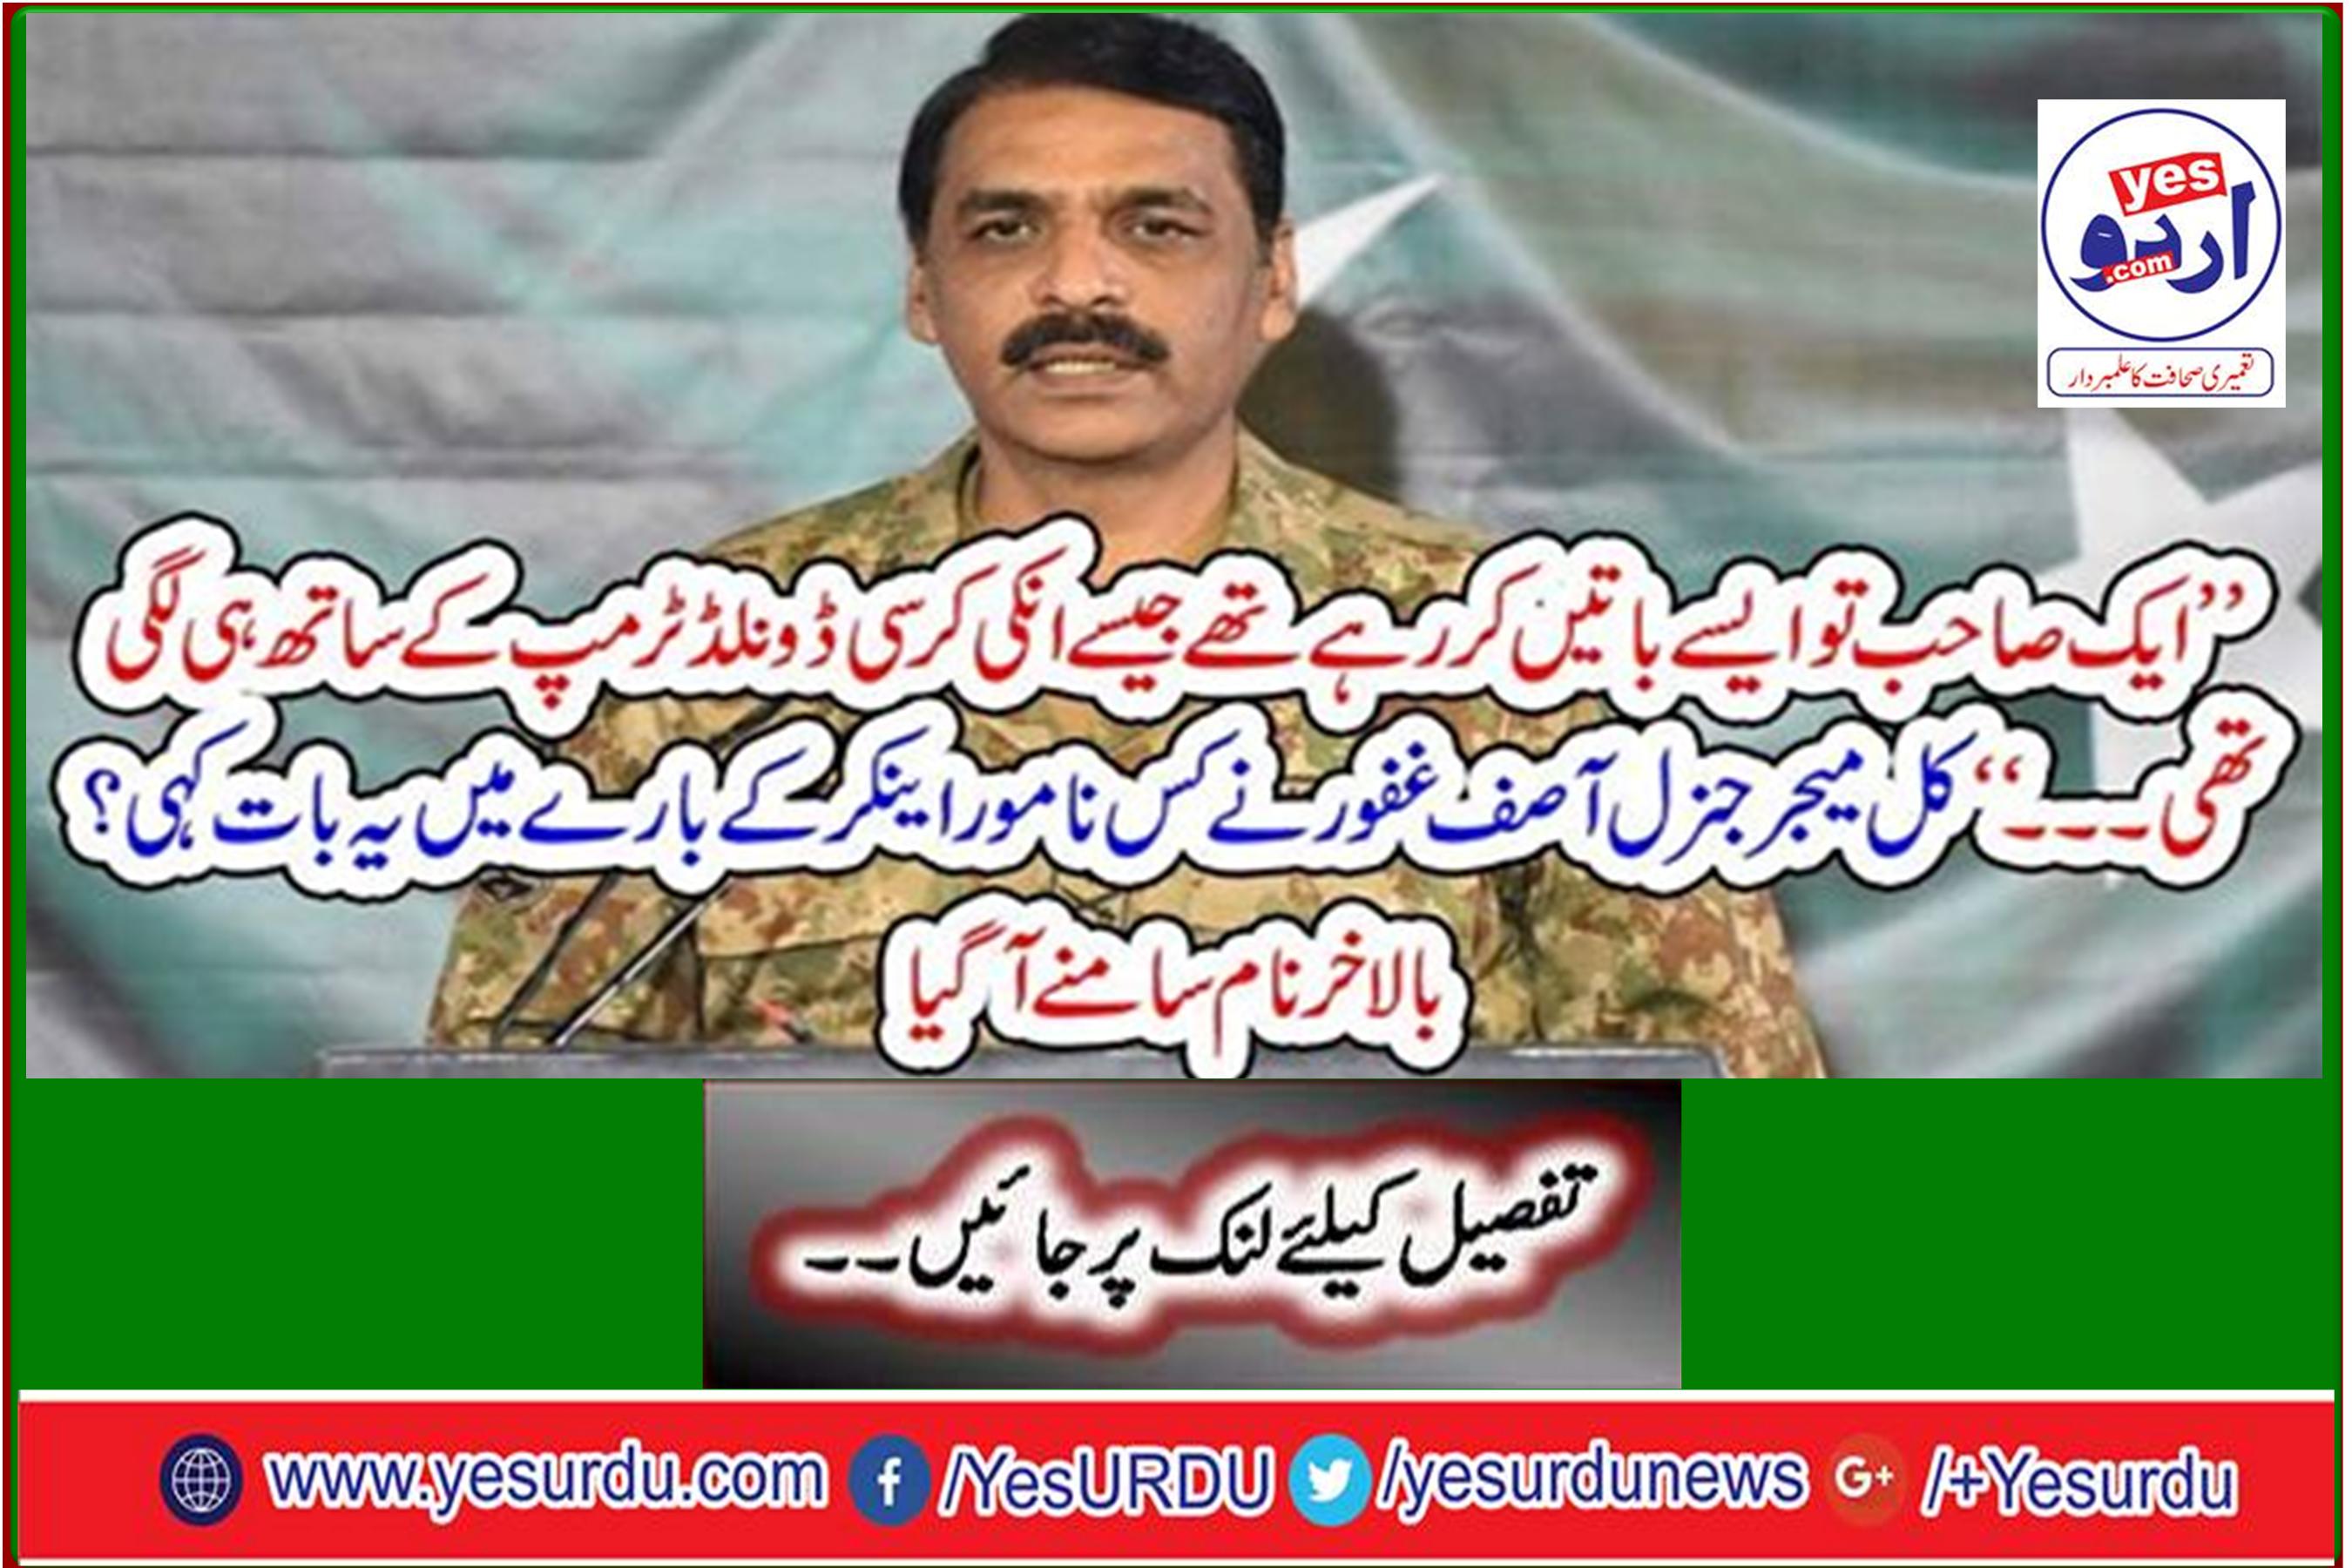 “What famous anchor did yesterday say that Major General Asif Ghafoor? Finally the name came out